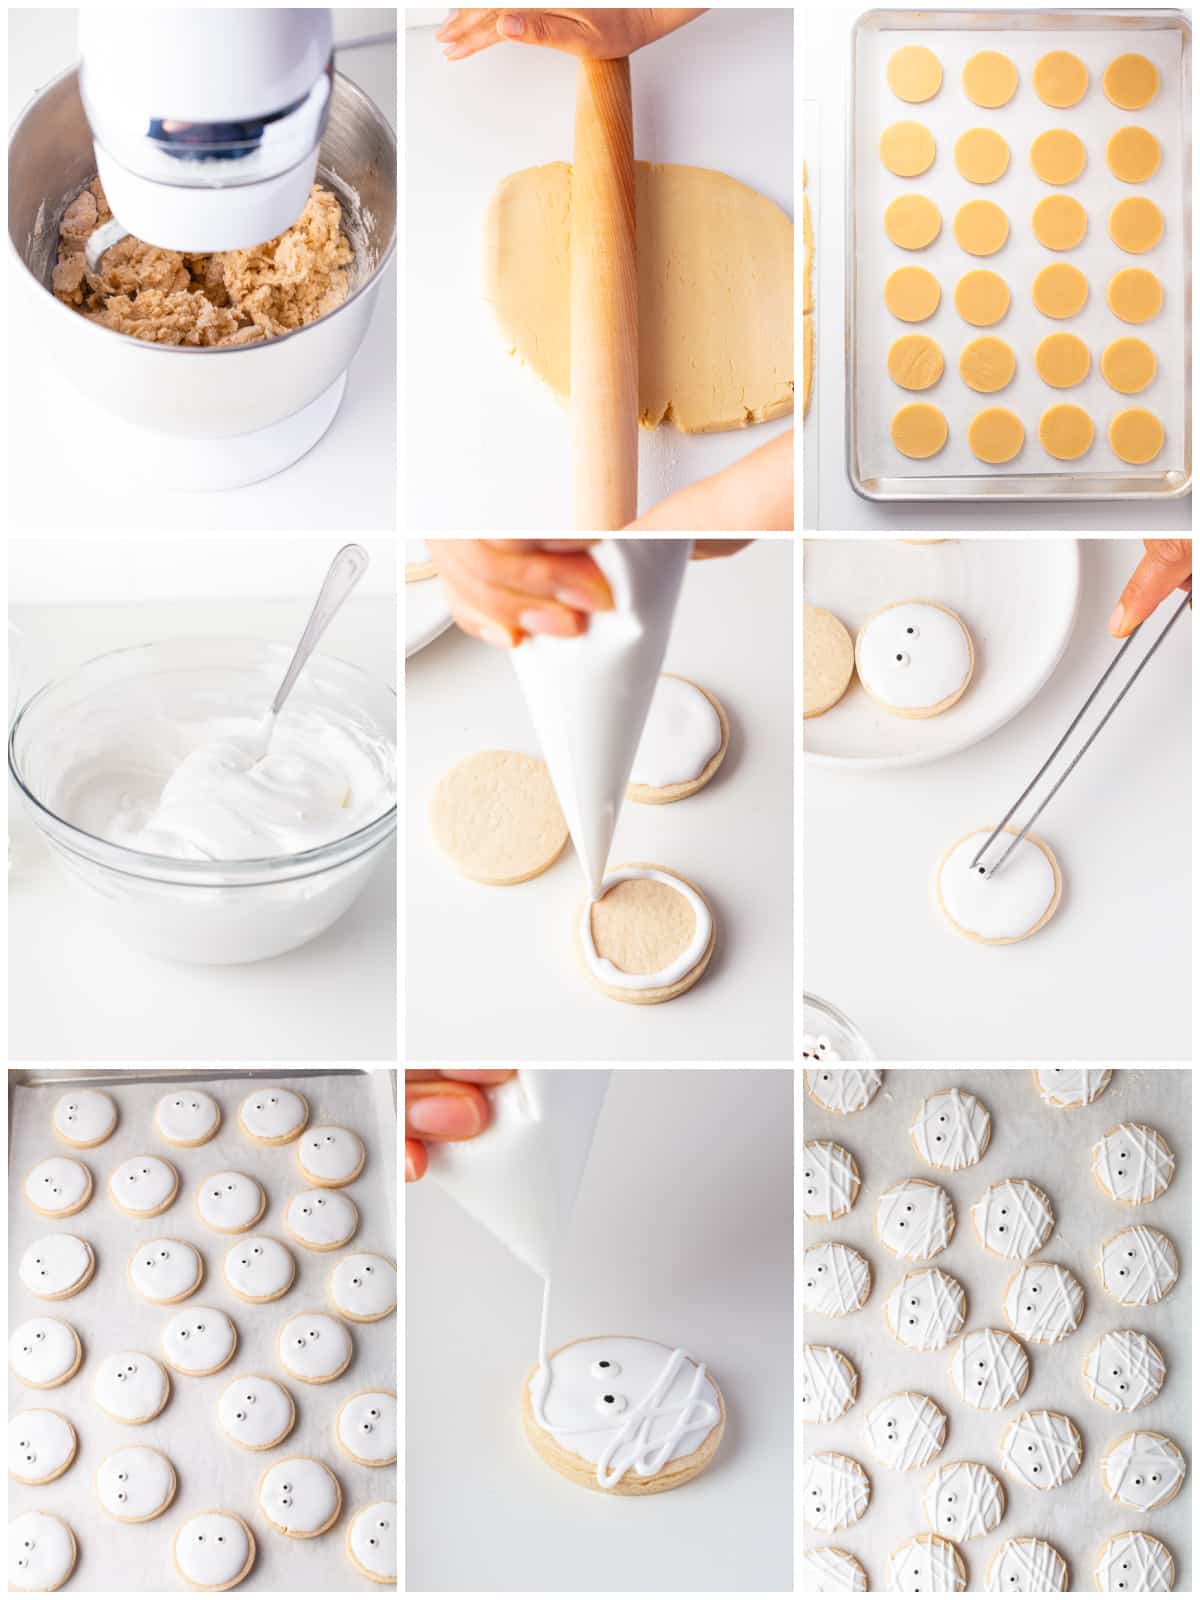 Step by step photos on how to make Mummy Cookies.